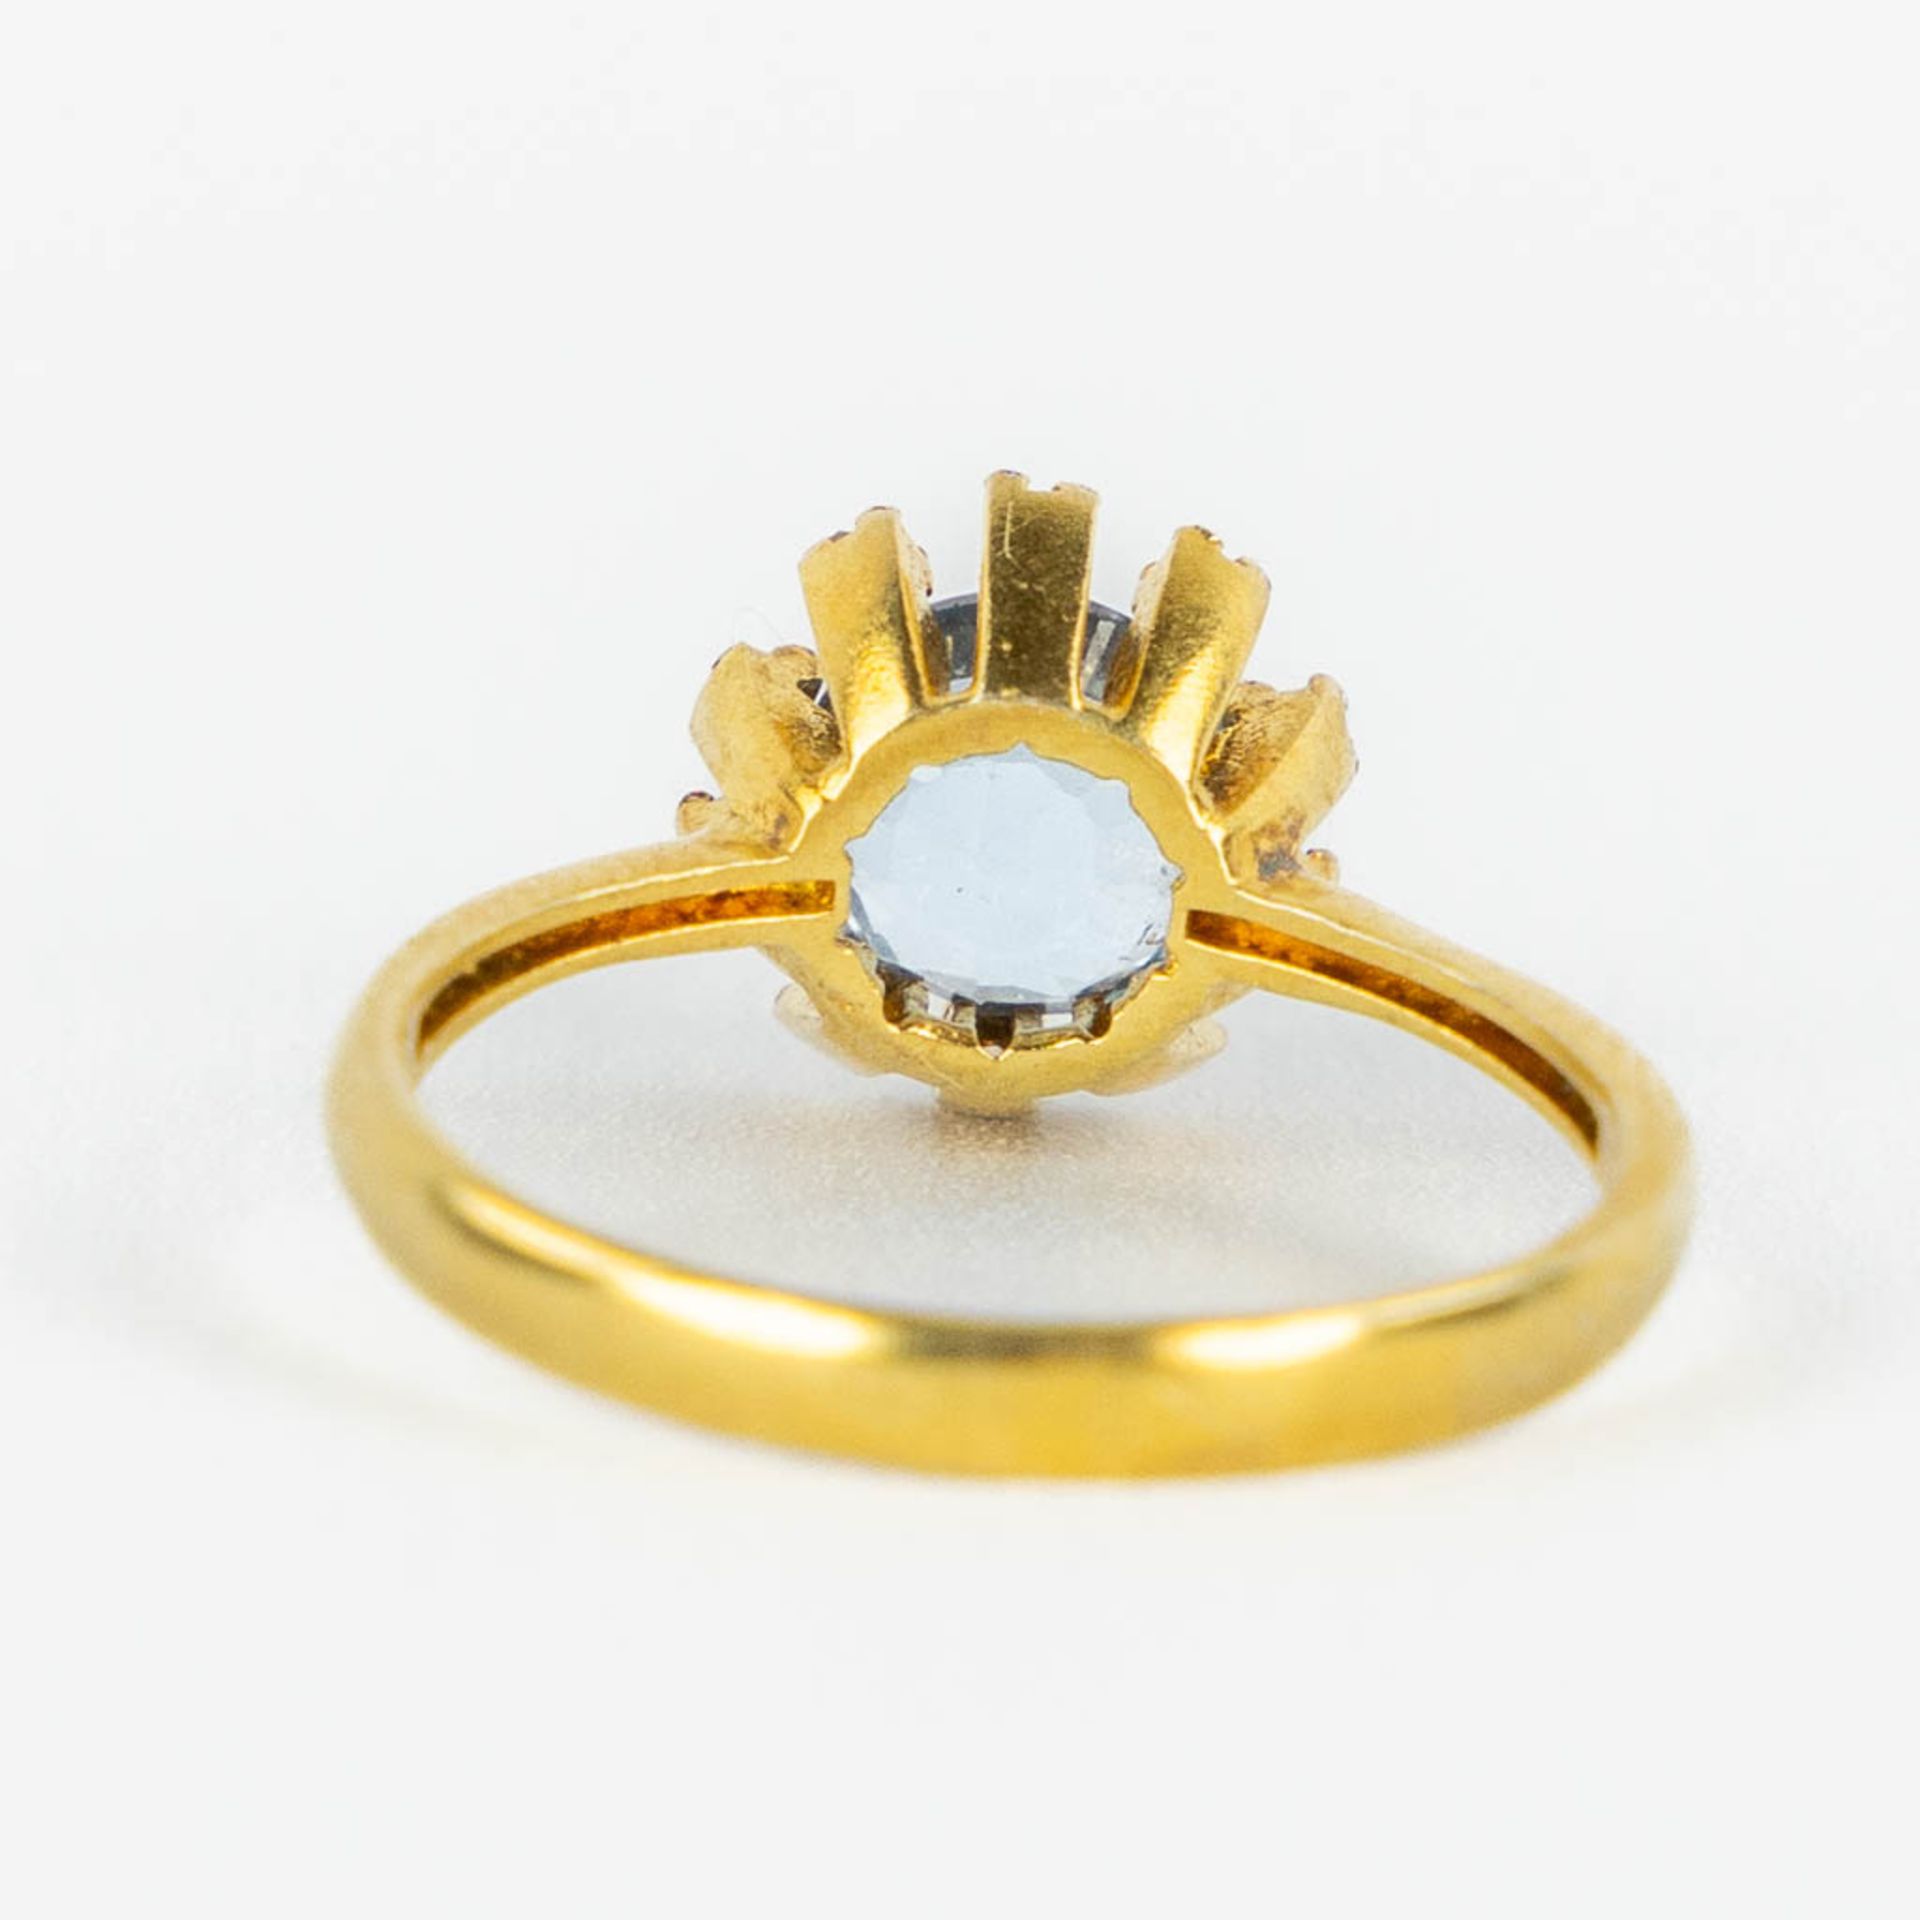 A ring, gilt silver with a cut topaaz, old cut diamonds. 2,48g. Ring size 59. - Image 7 of 9